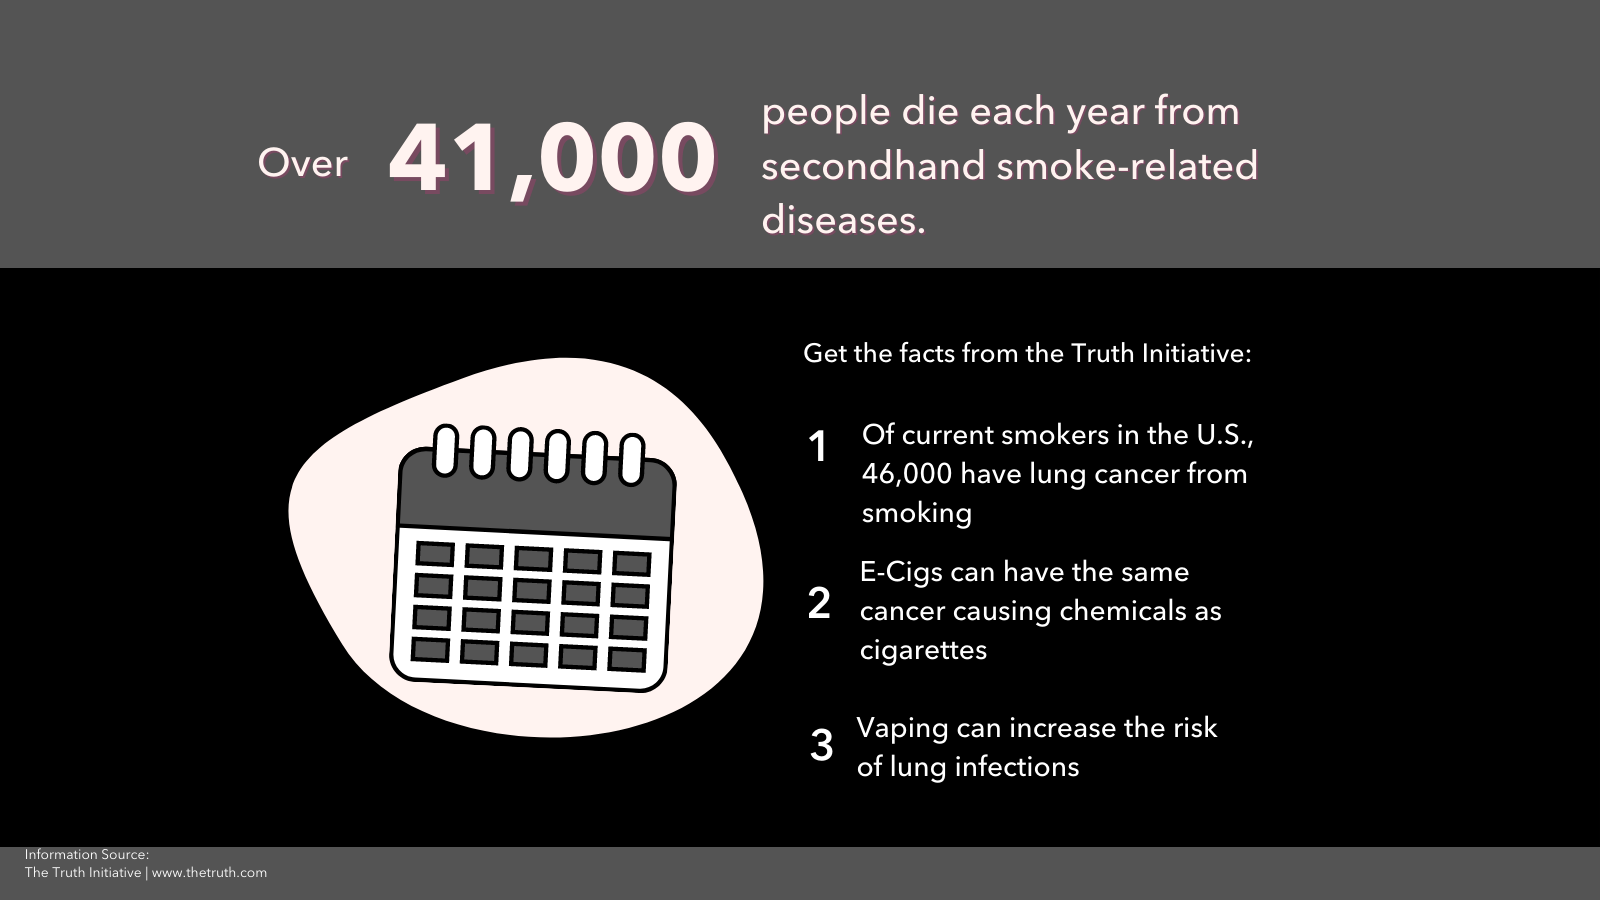 Infographic displaying information on lung cancer statistics from the Truth Initiative